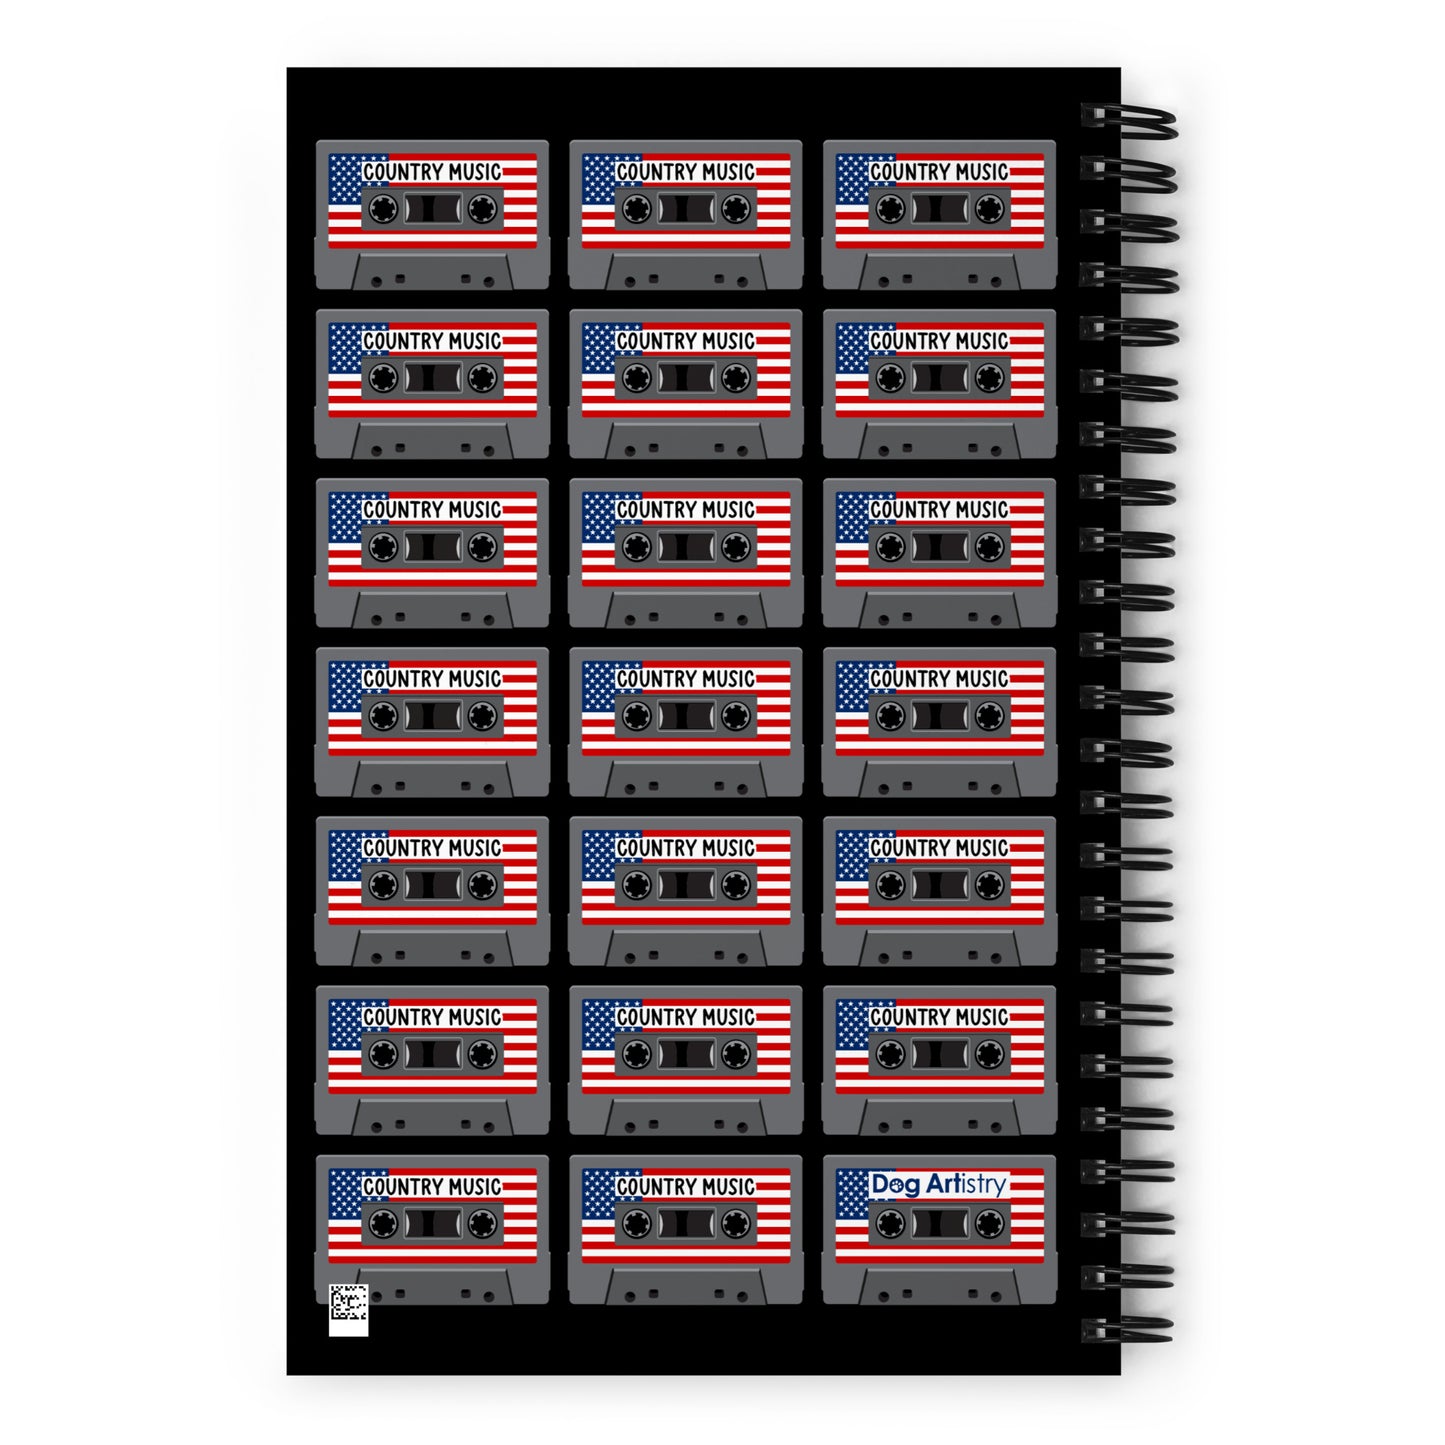 Country Music Cassette Tapes with American Flag Spiral notebook Designed by Dog Artistry